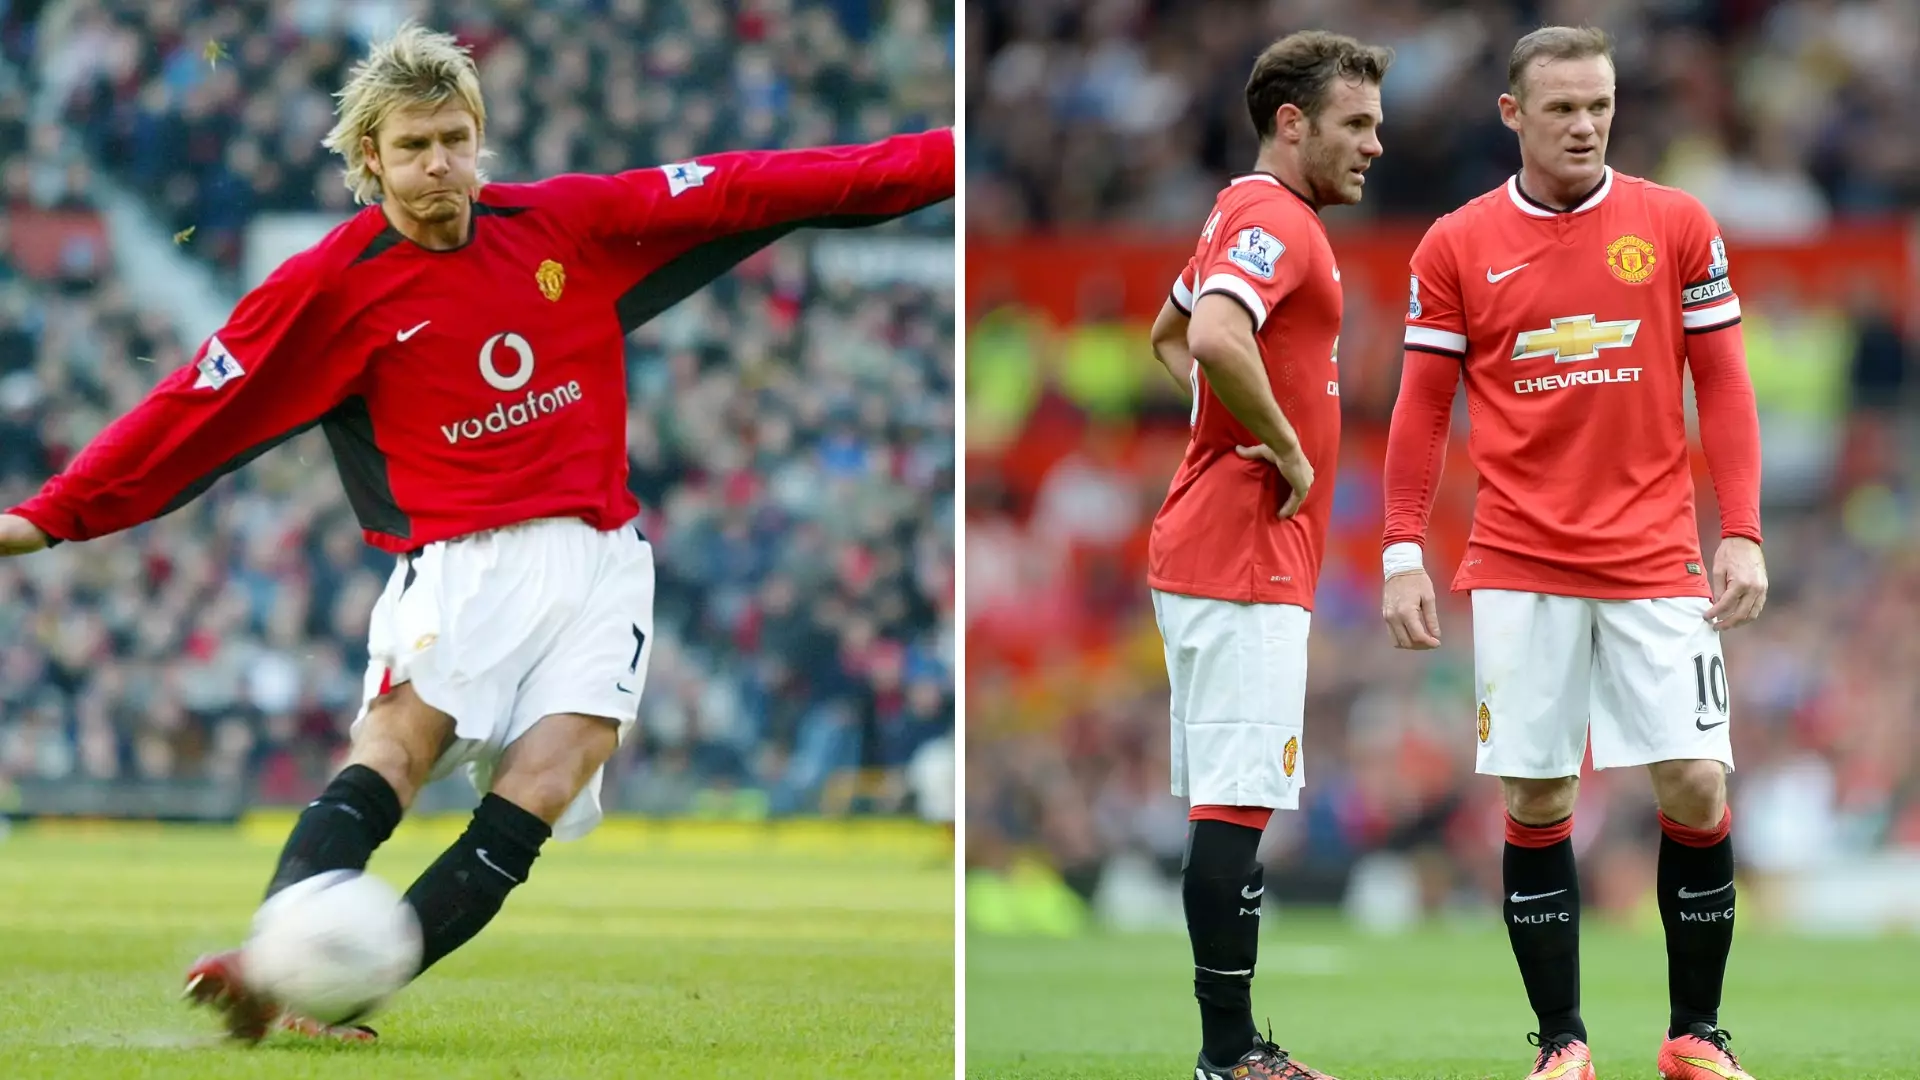 Mata Is On Course To Break Beckham's Free-Kick Record If He Stays At United